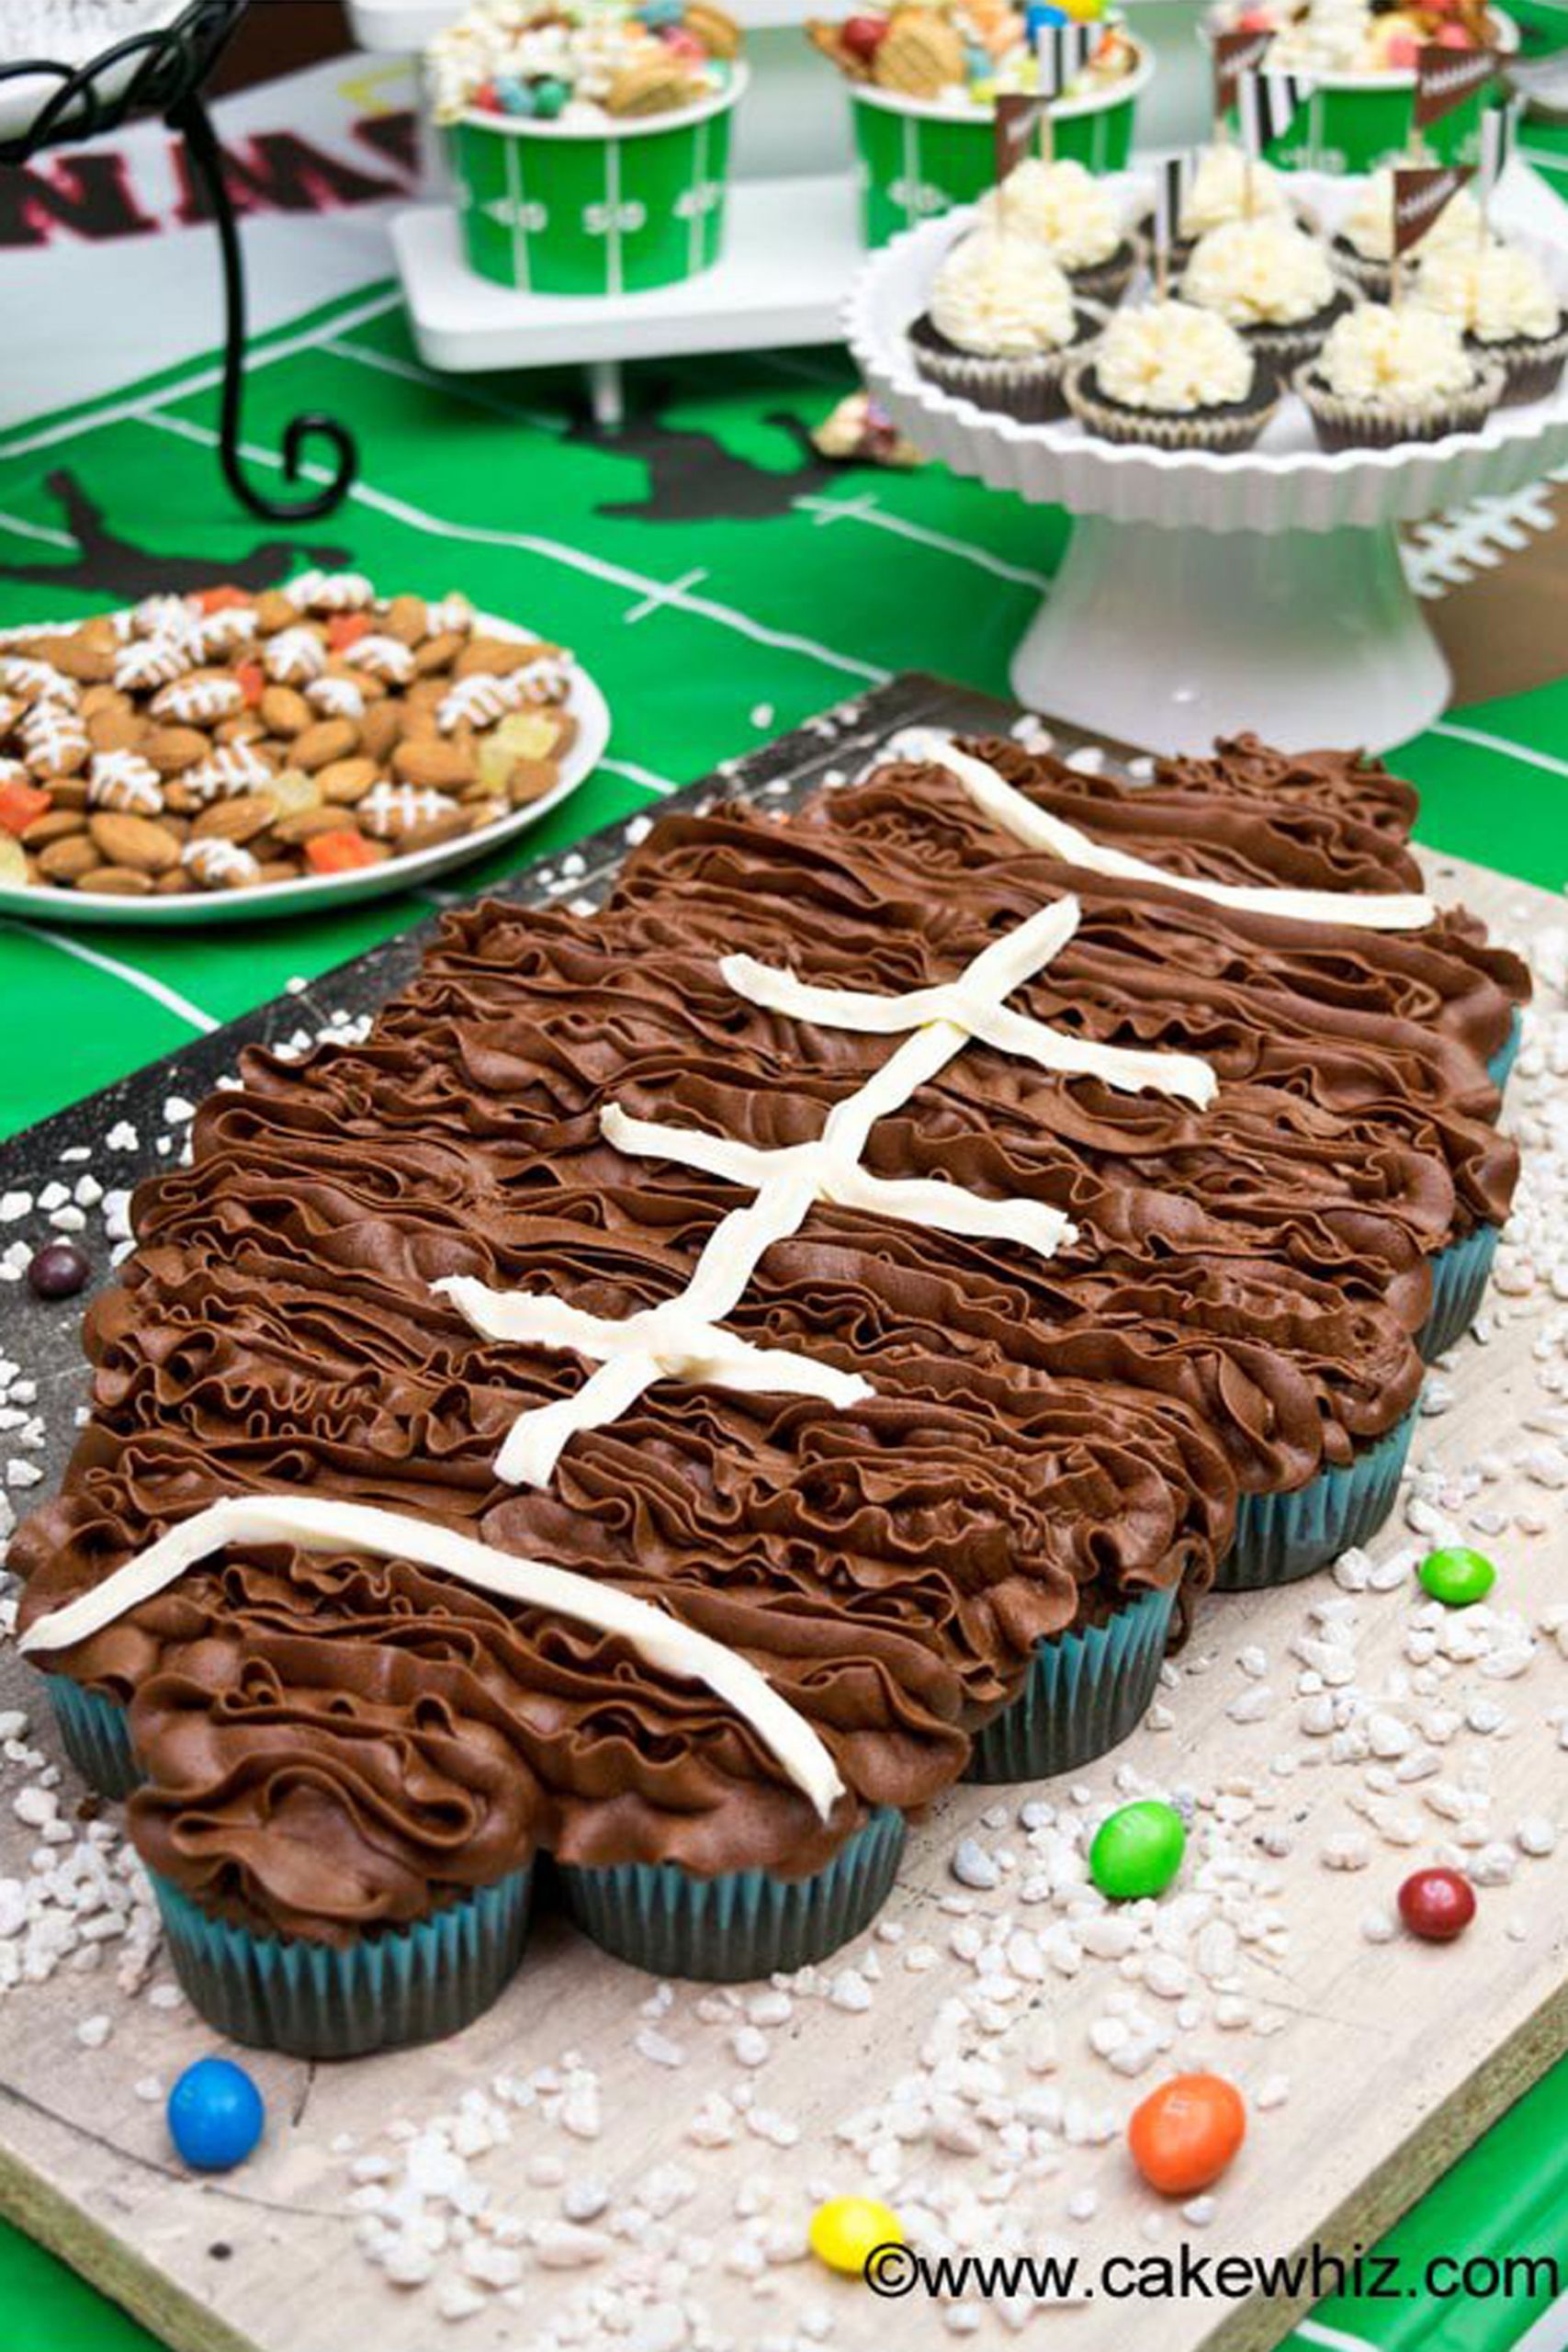 Super Bowl Theme Desserts
 Serve These Football Themed Desserts at This Year s Super